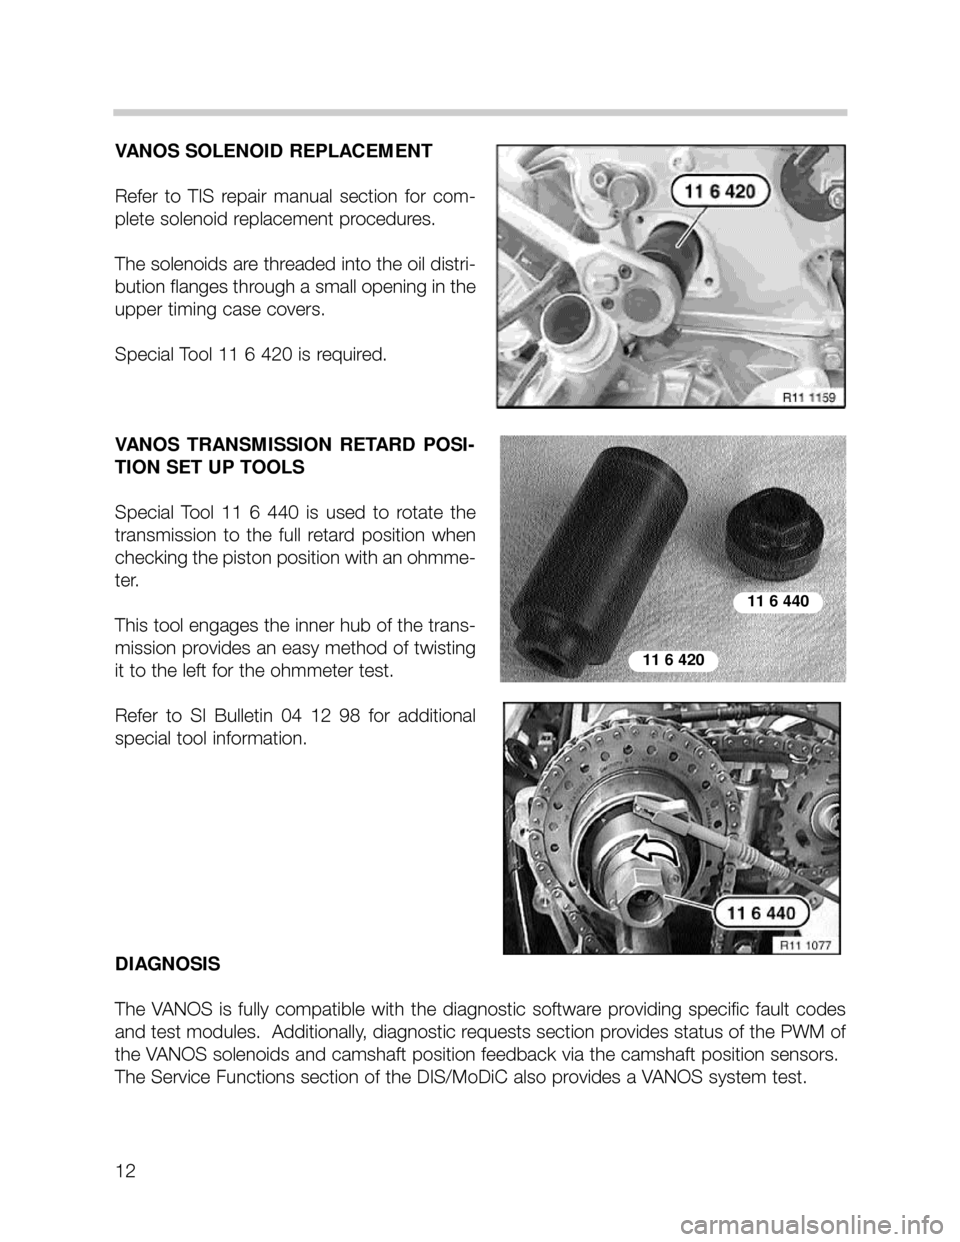 BMW 740i 2001 E38 M62TU Engine Workshop Manual 12
VANOS SOLENOID REPLACEMENT
Refer  to  TIS  repair  manual  section  for  com-
plete solenoid replacement procedures.  
The solenoids are threaded into the oil distri-
bution flanges through a small